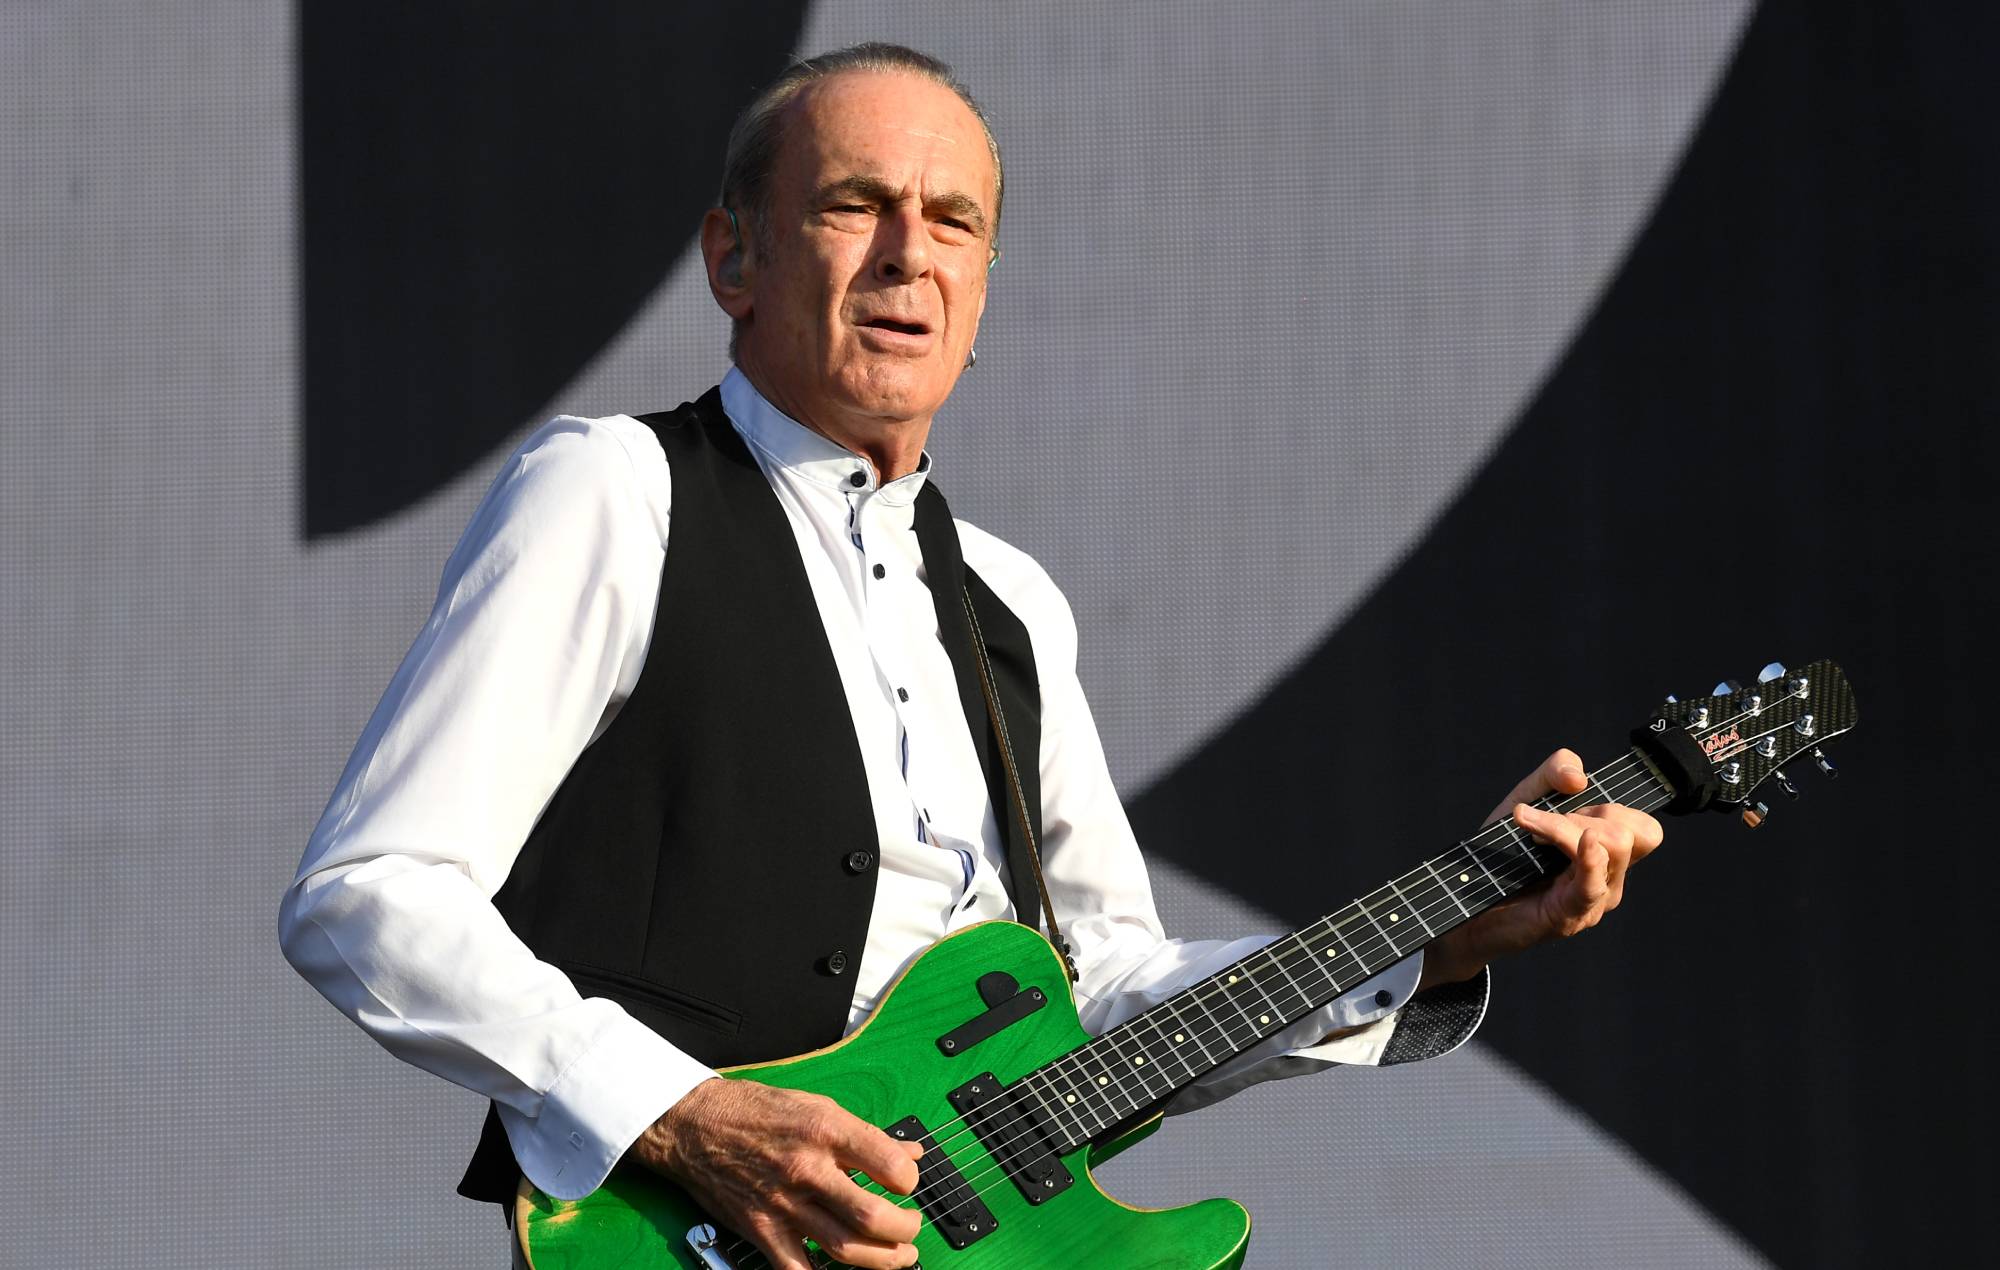 Francis Rossi on the future of Status Quo: “I don’t think we will go again”